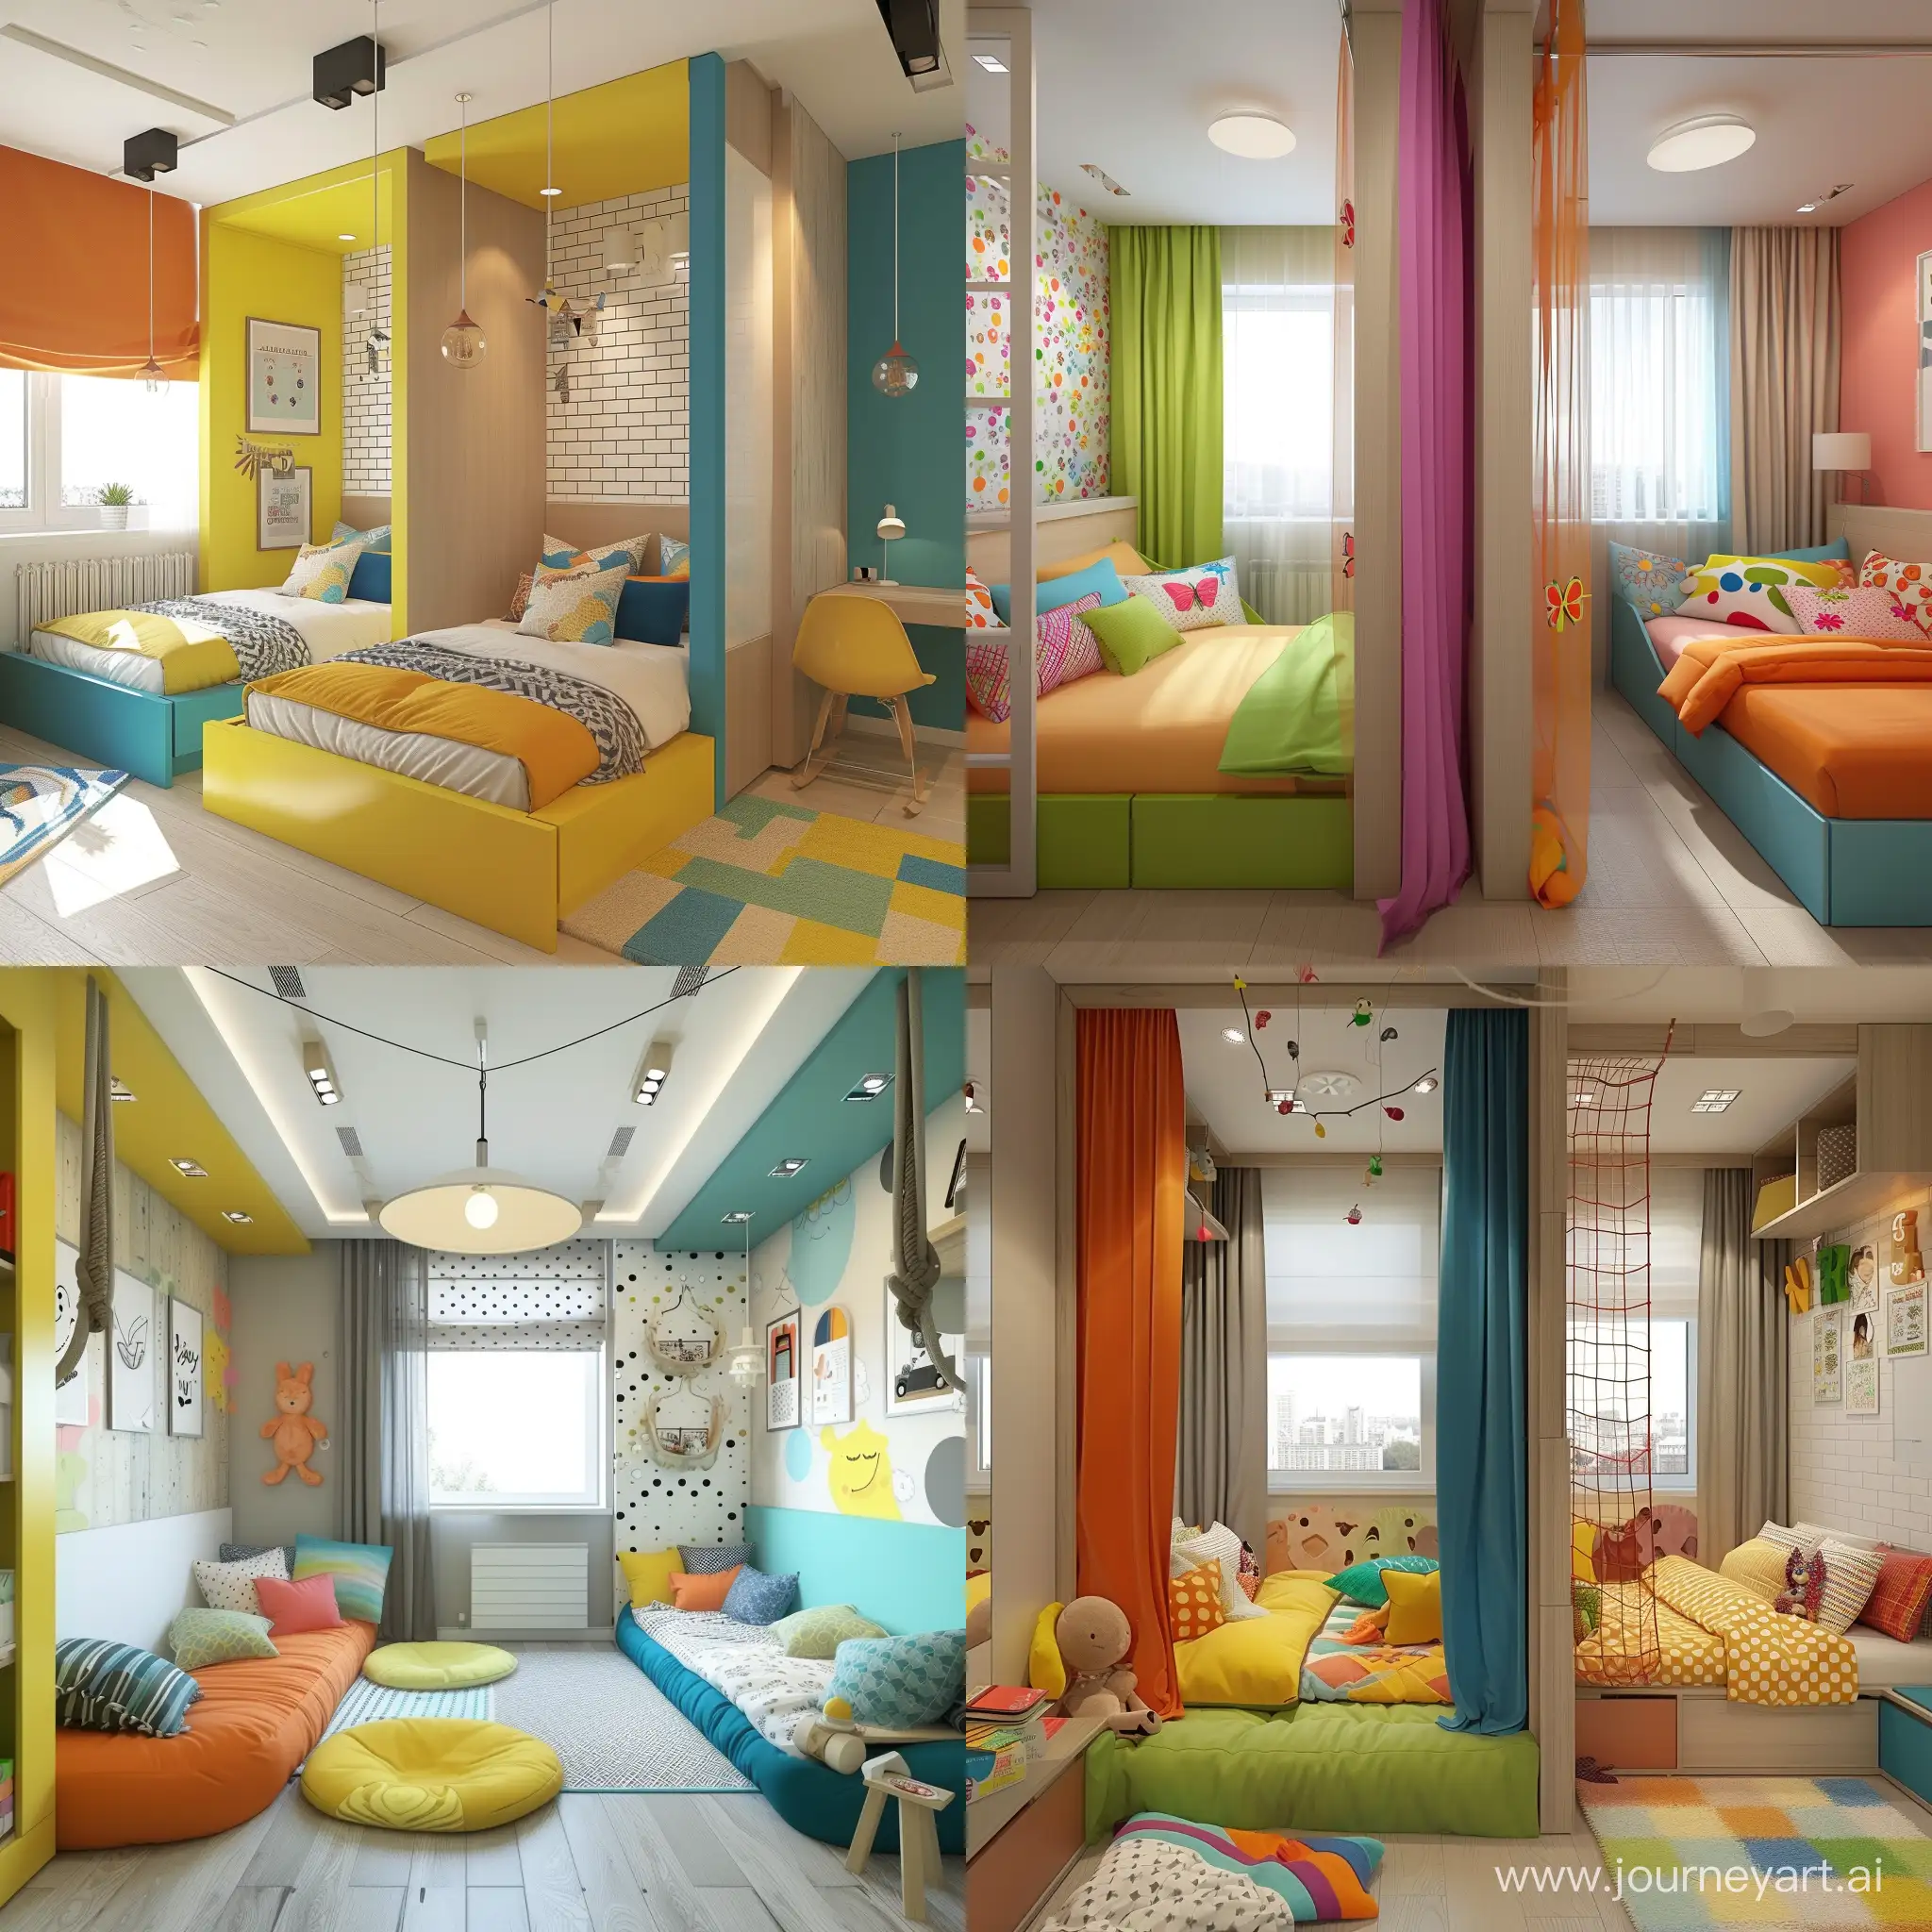 Bright-and-Playful-Childrens-Room-Interior-Design-with-Zoning